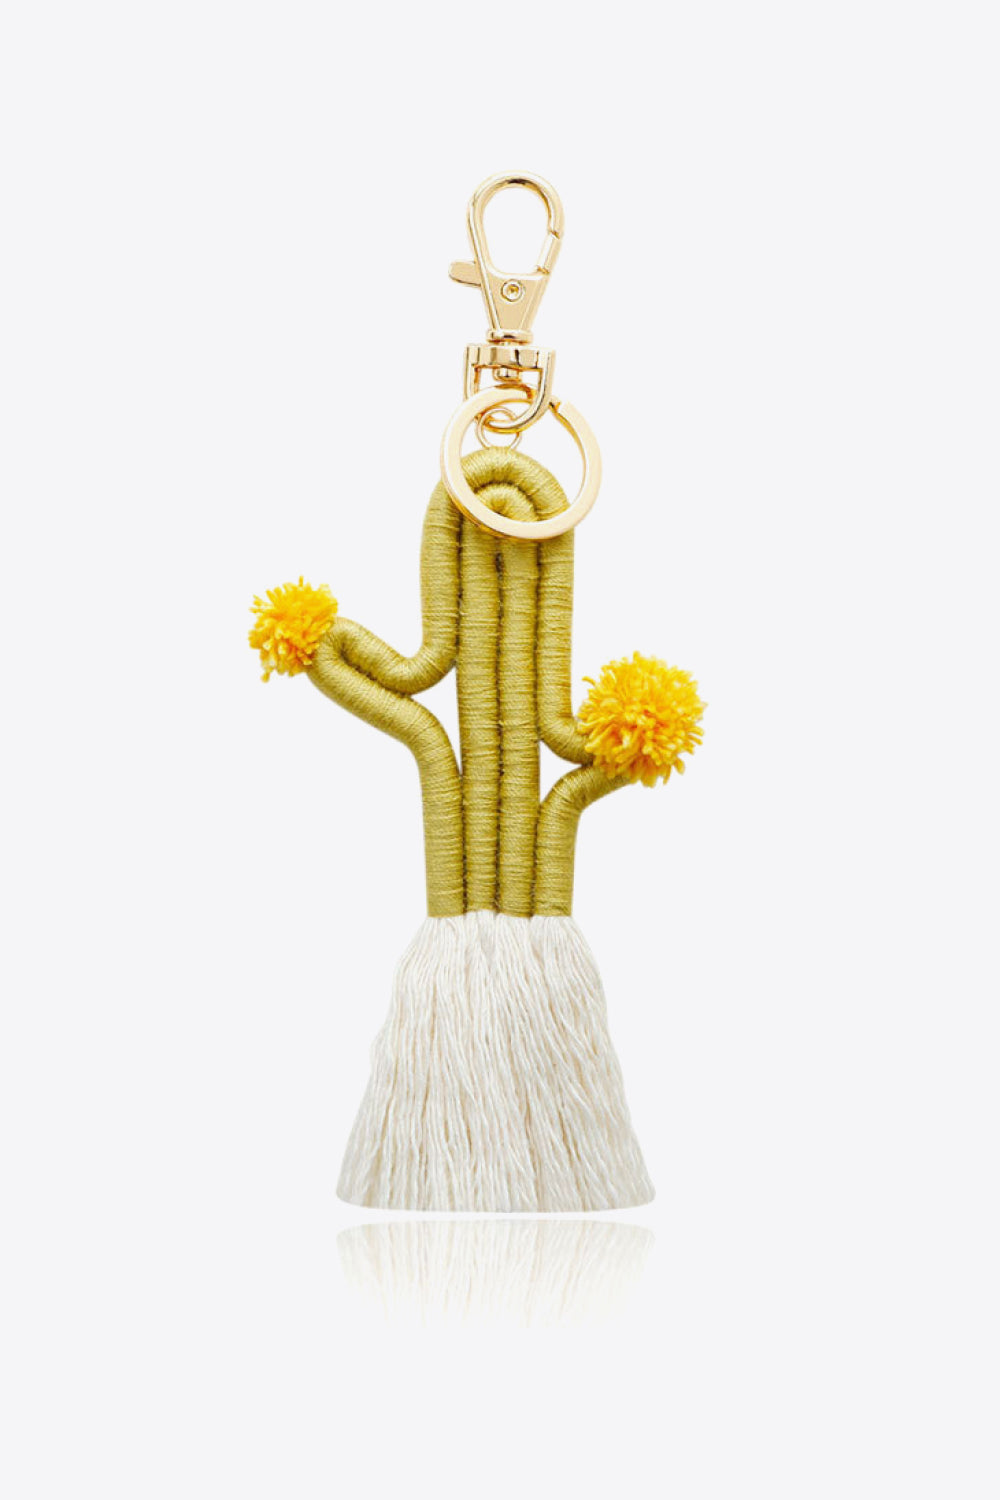 Trendsi Cupid Beauty Supplies Straw / One Size Keychains Cactus Keychain with Fringe